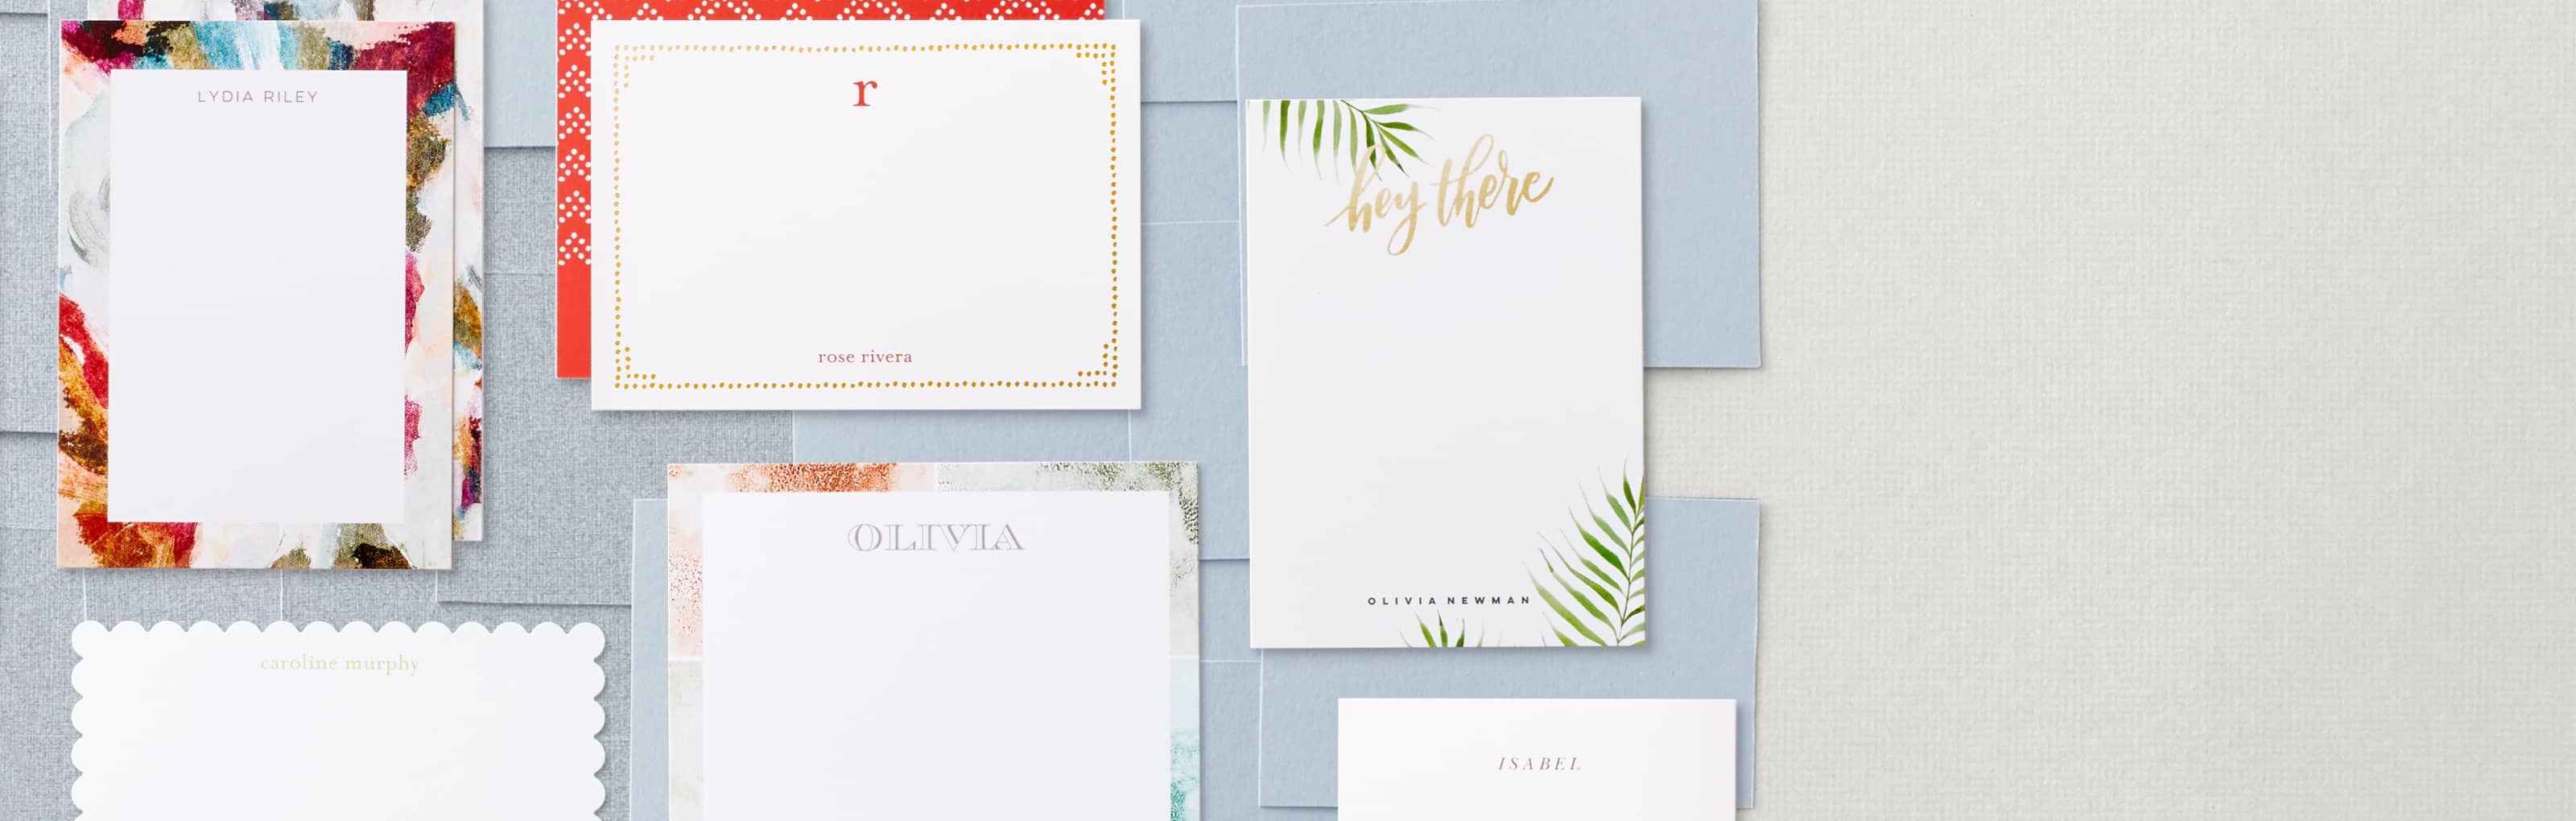 A collection of colorful personalized stationery